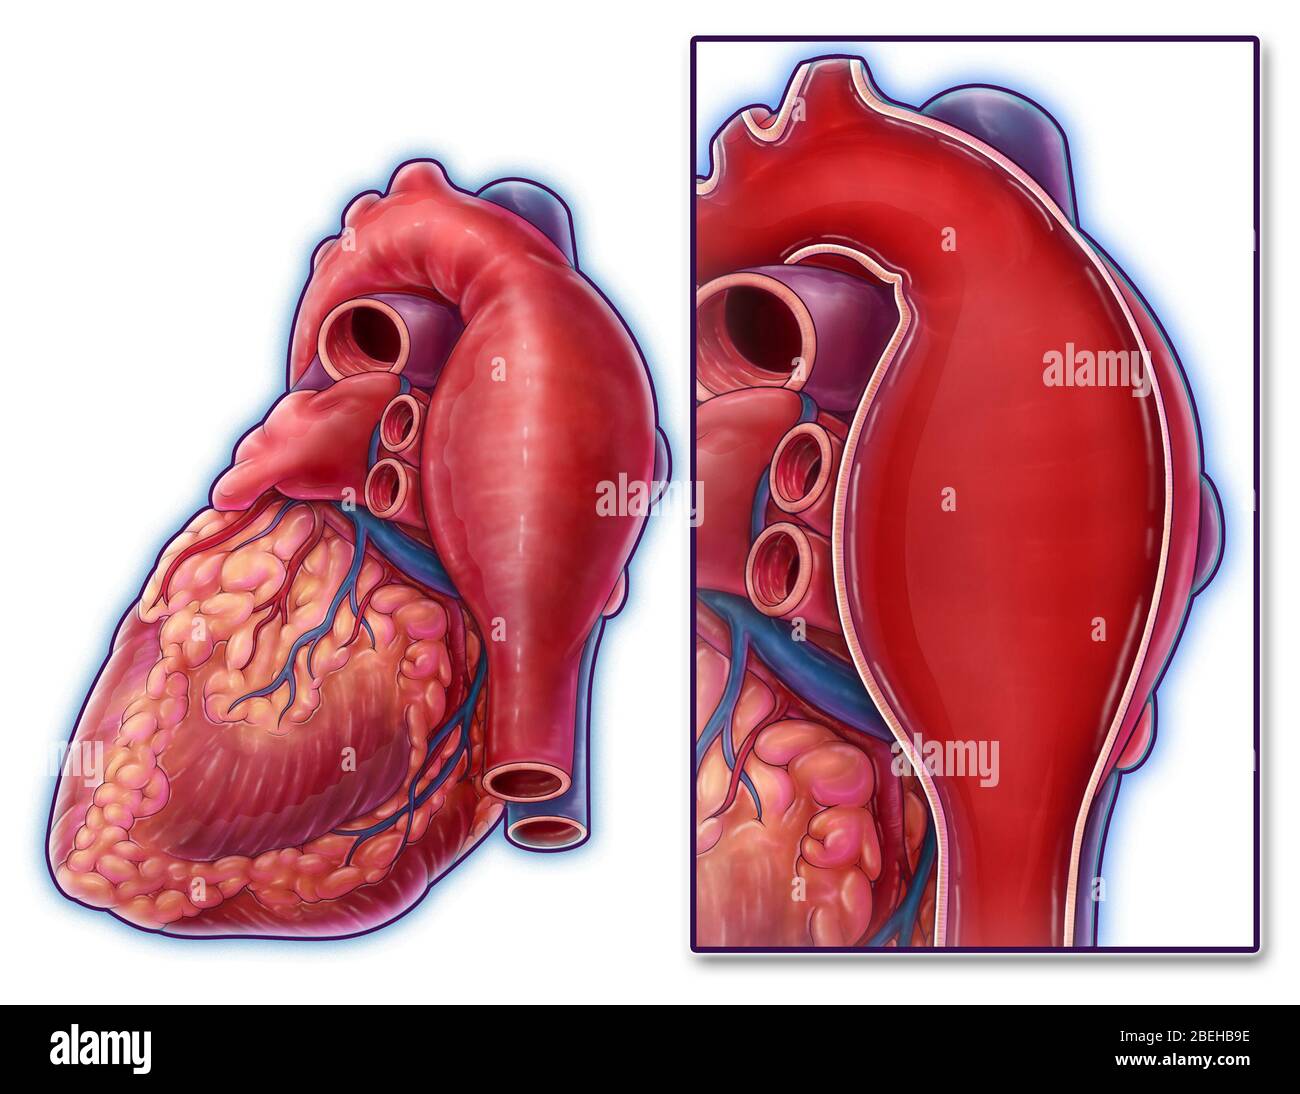 Thoracic Aortic Aneurysm, Illustration Stock Photo